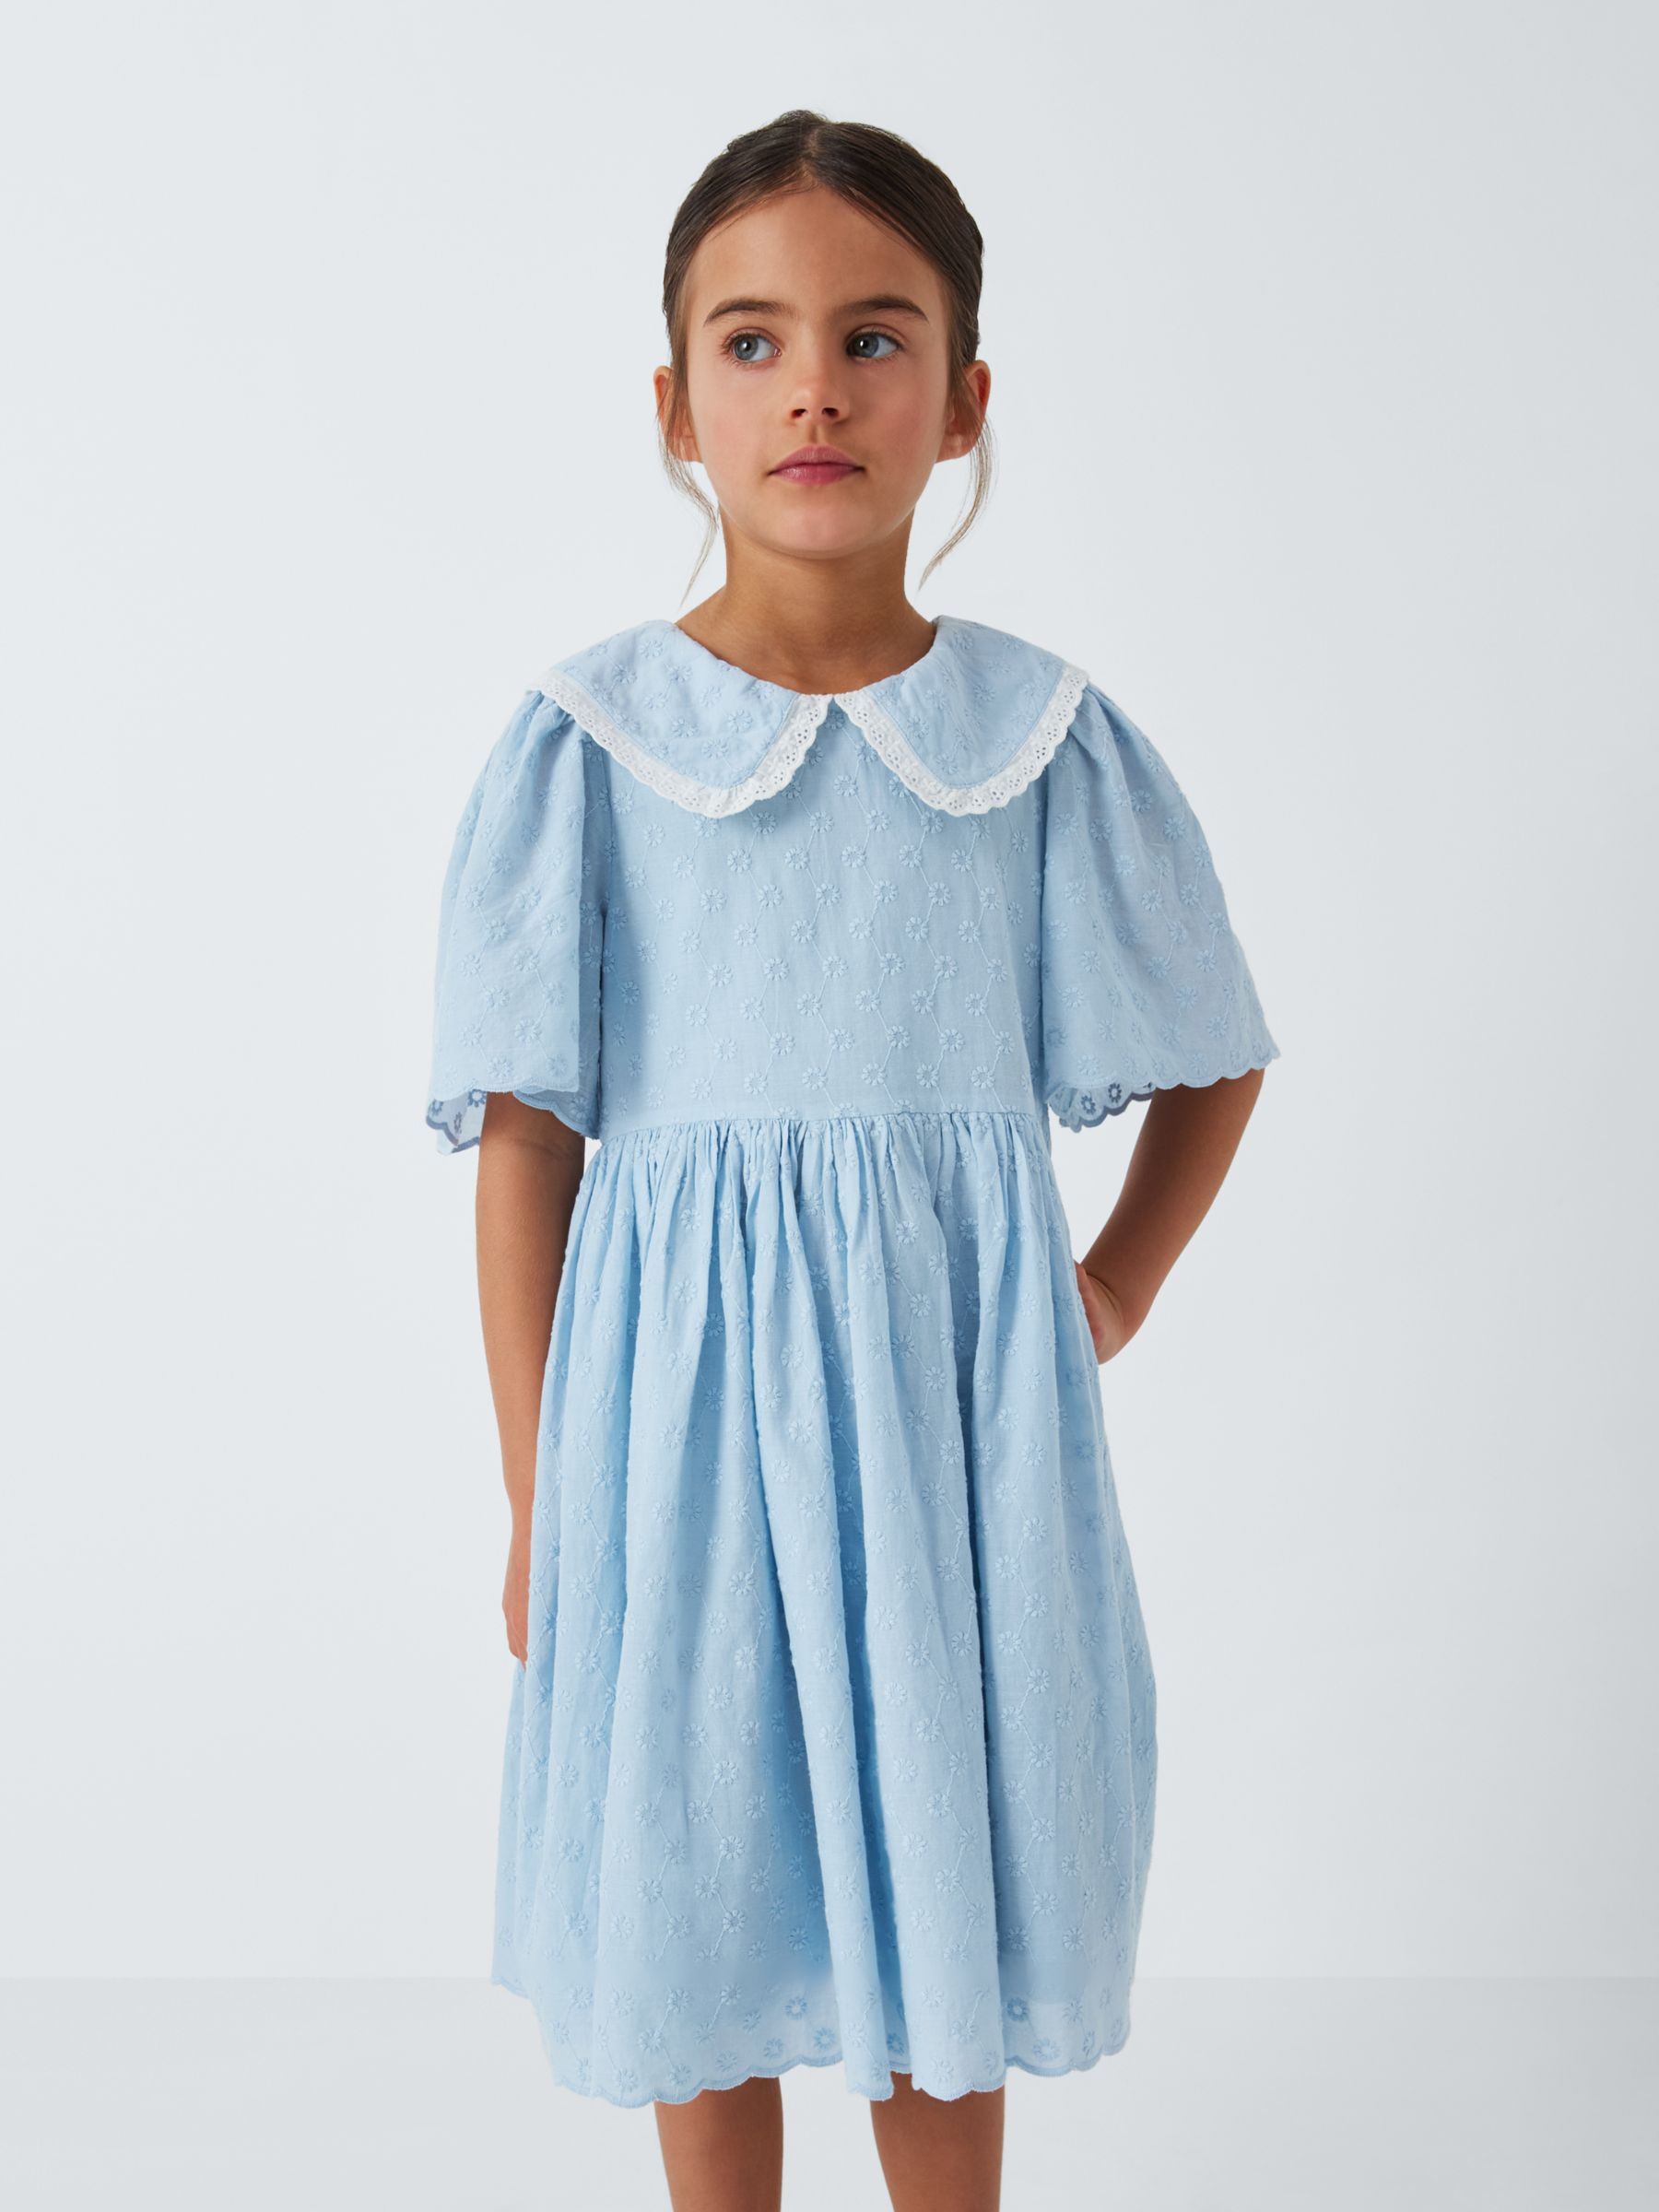 John Lewis Heirloom Collection Embroidered Oversized Collar Dress, Blue, 7 years